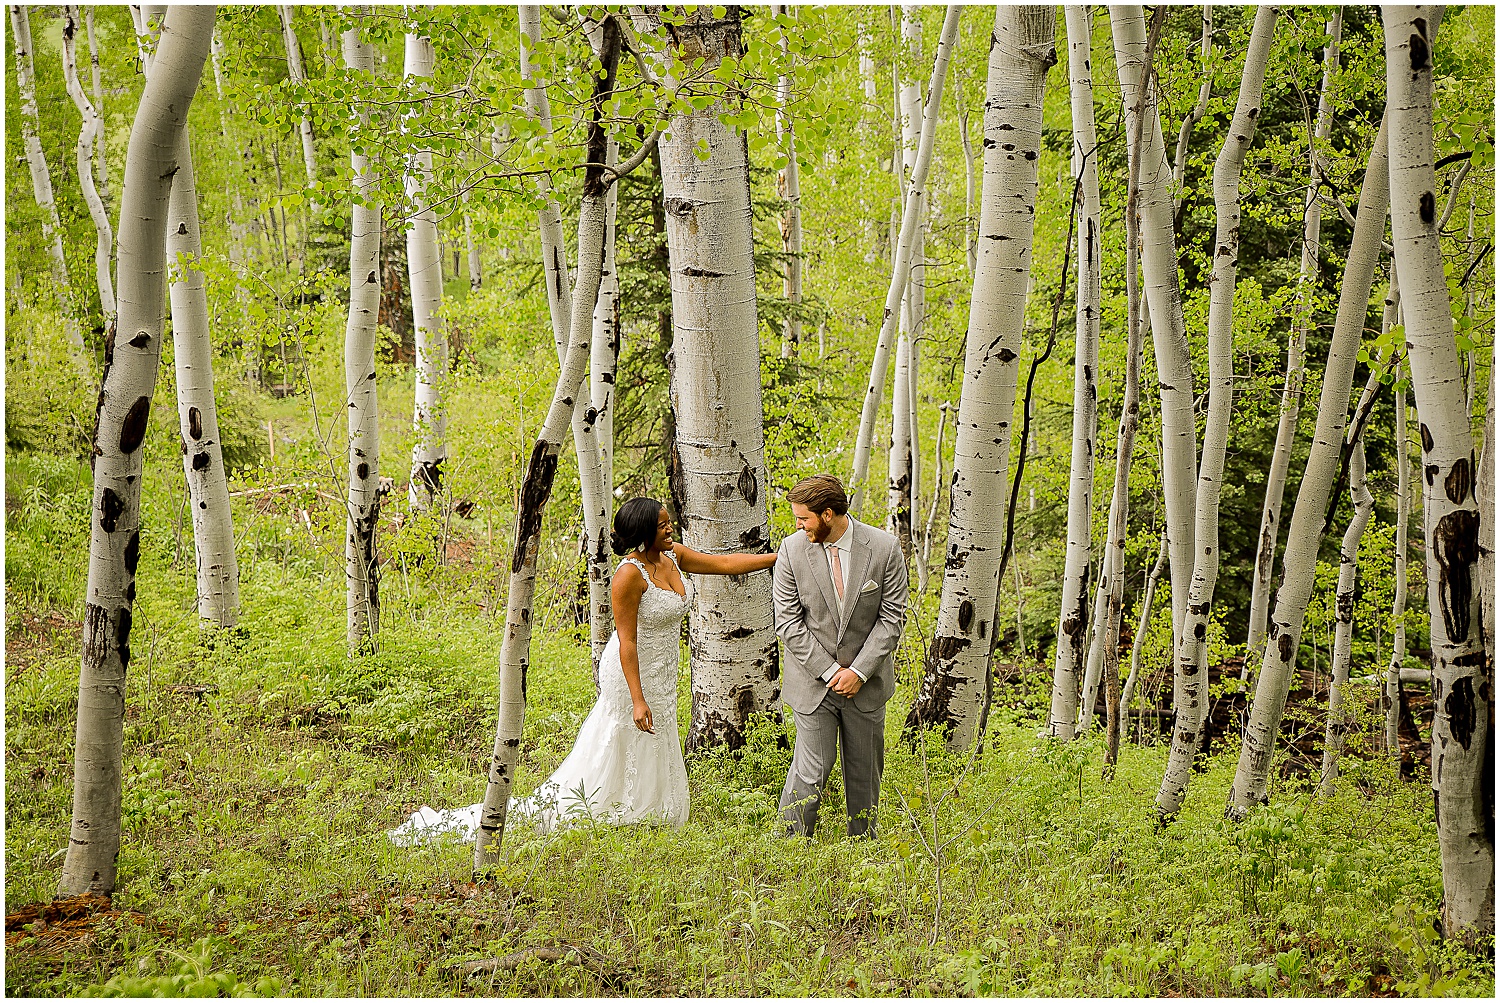 Mountain Village Wedding Photos, Telluride Wedding Photographer, mountain wedding, summer wedding, Telluride photographer, Colorado photographer, destination photographer, bride, the first look, wedding details, wedding dress, groom, outdoors, rustic, wedding day, tie the knot